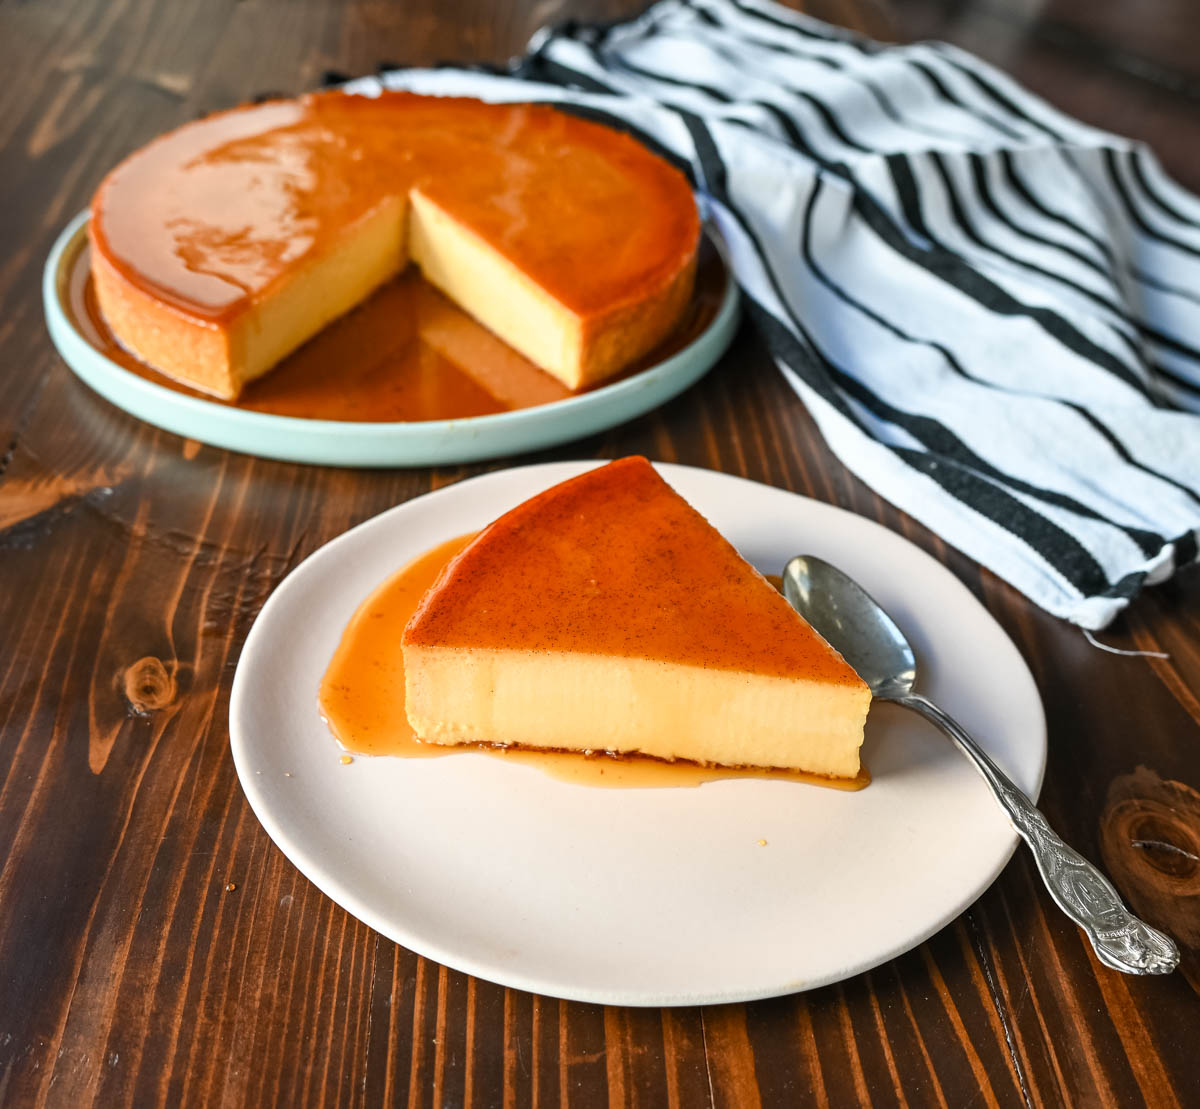 Caramel Flan Recipe. This is hands down the best Flan recipe ever! This flan recipe has the smoothest, creamiest custard and topped with caramelized sugar. This is my neighbor's famous recipe that she has been making for over 60 years!